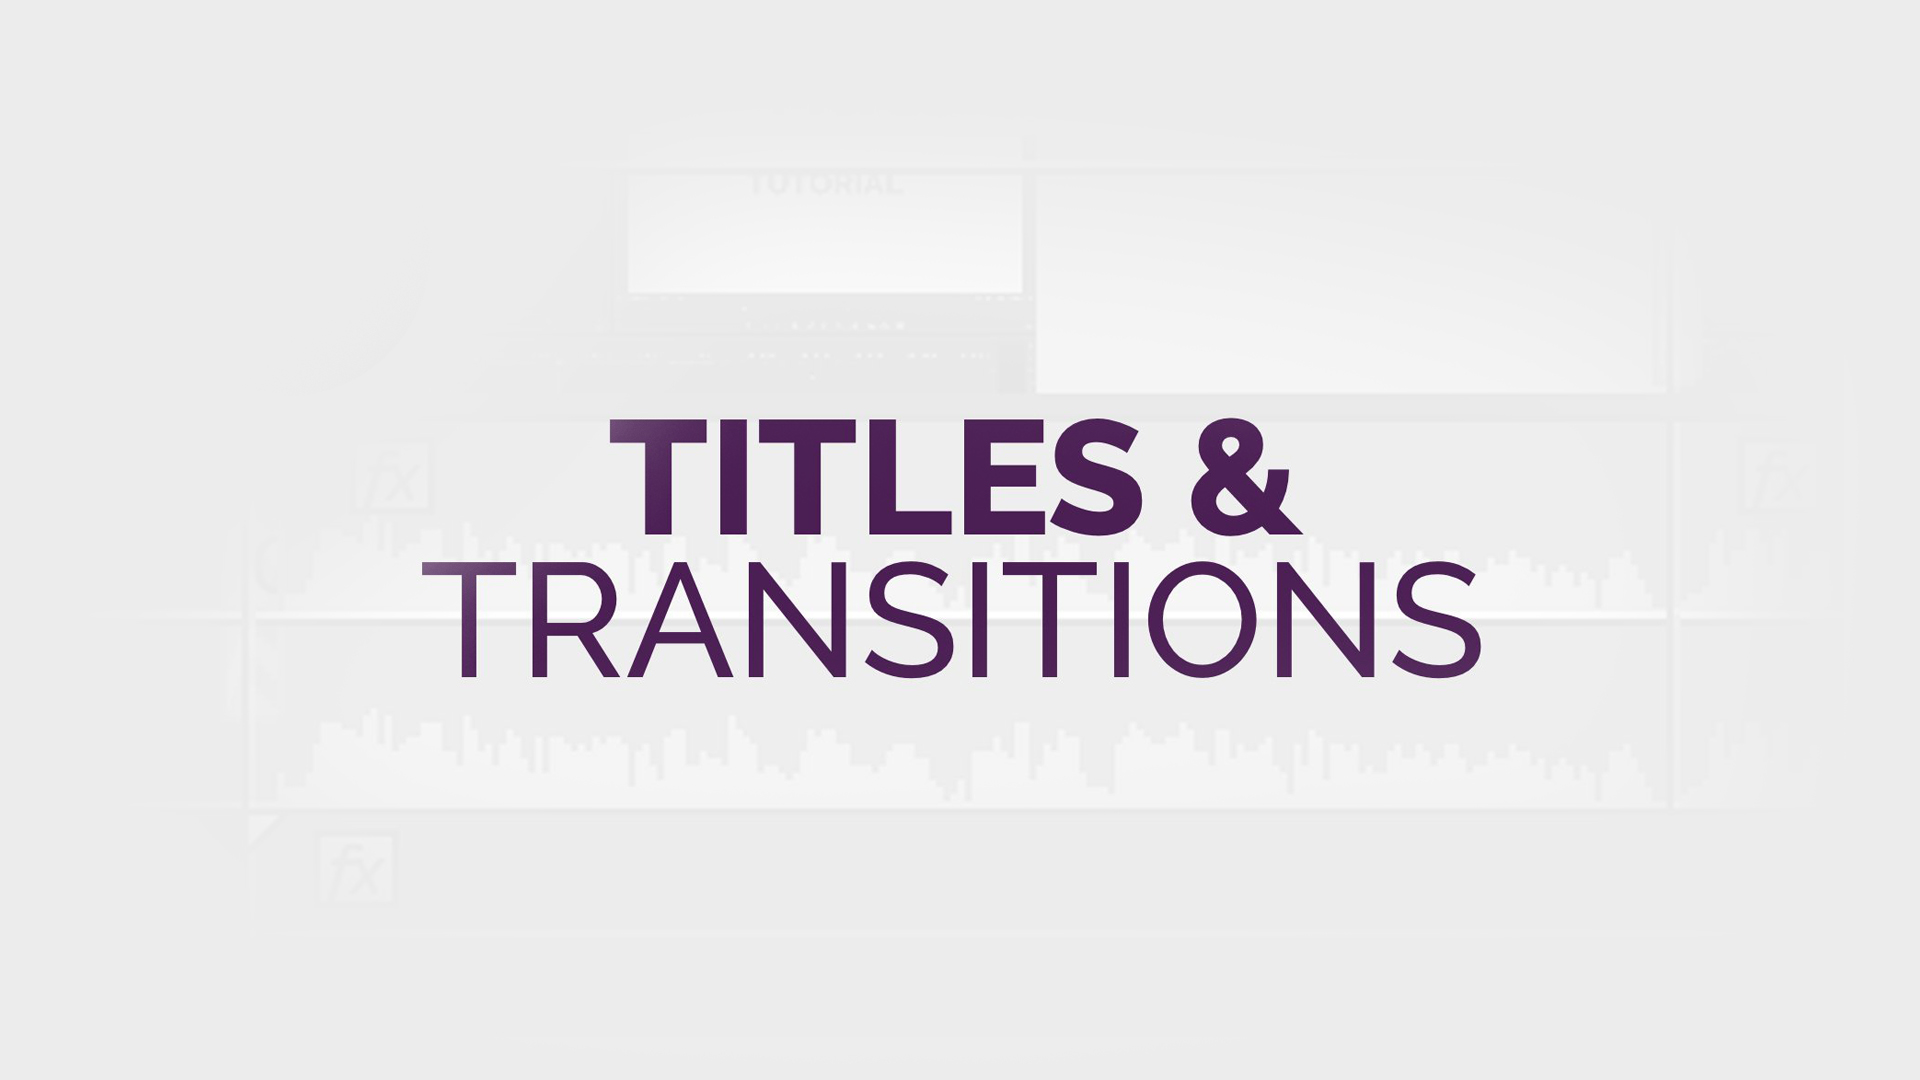 adobe premiere pro 2021 transitions pack free download